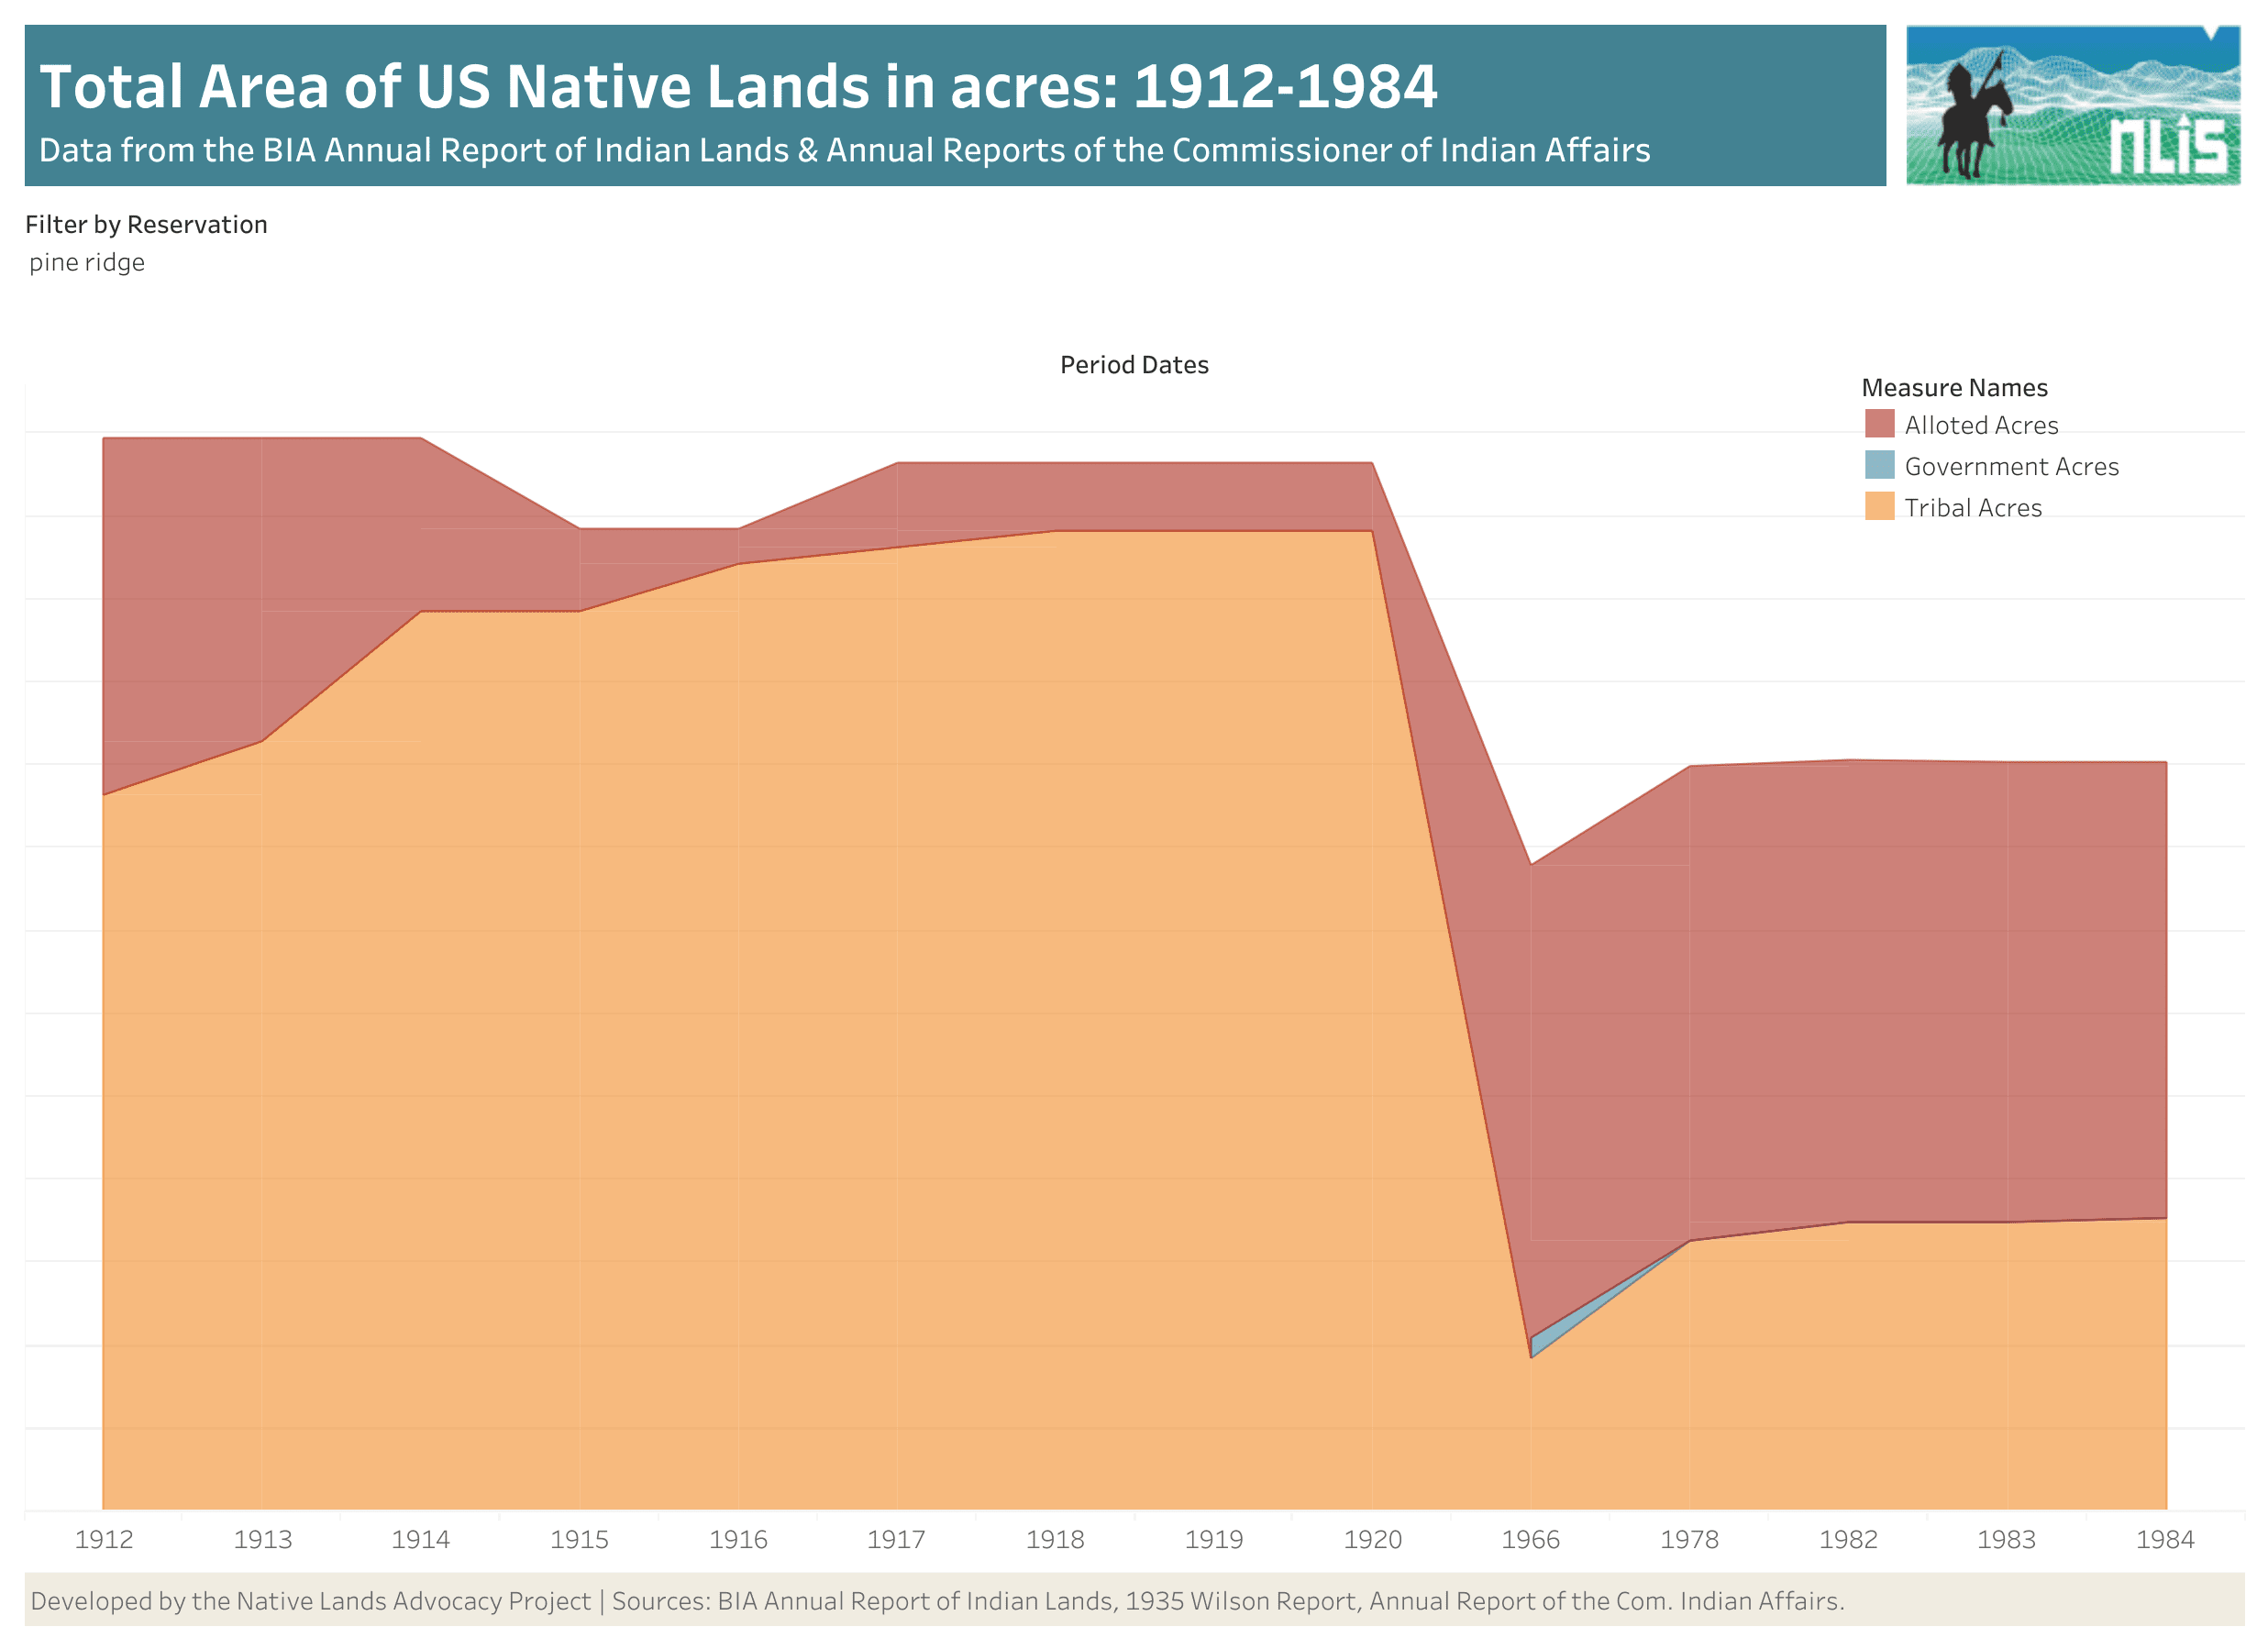 Total Area of US Native Lands in Acres: 1912-1984